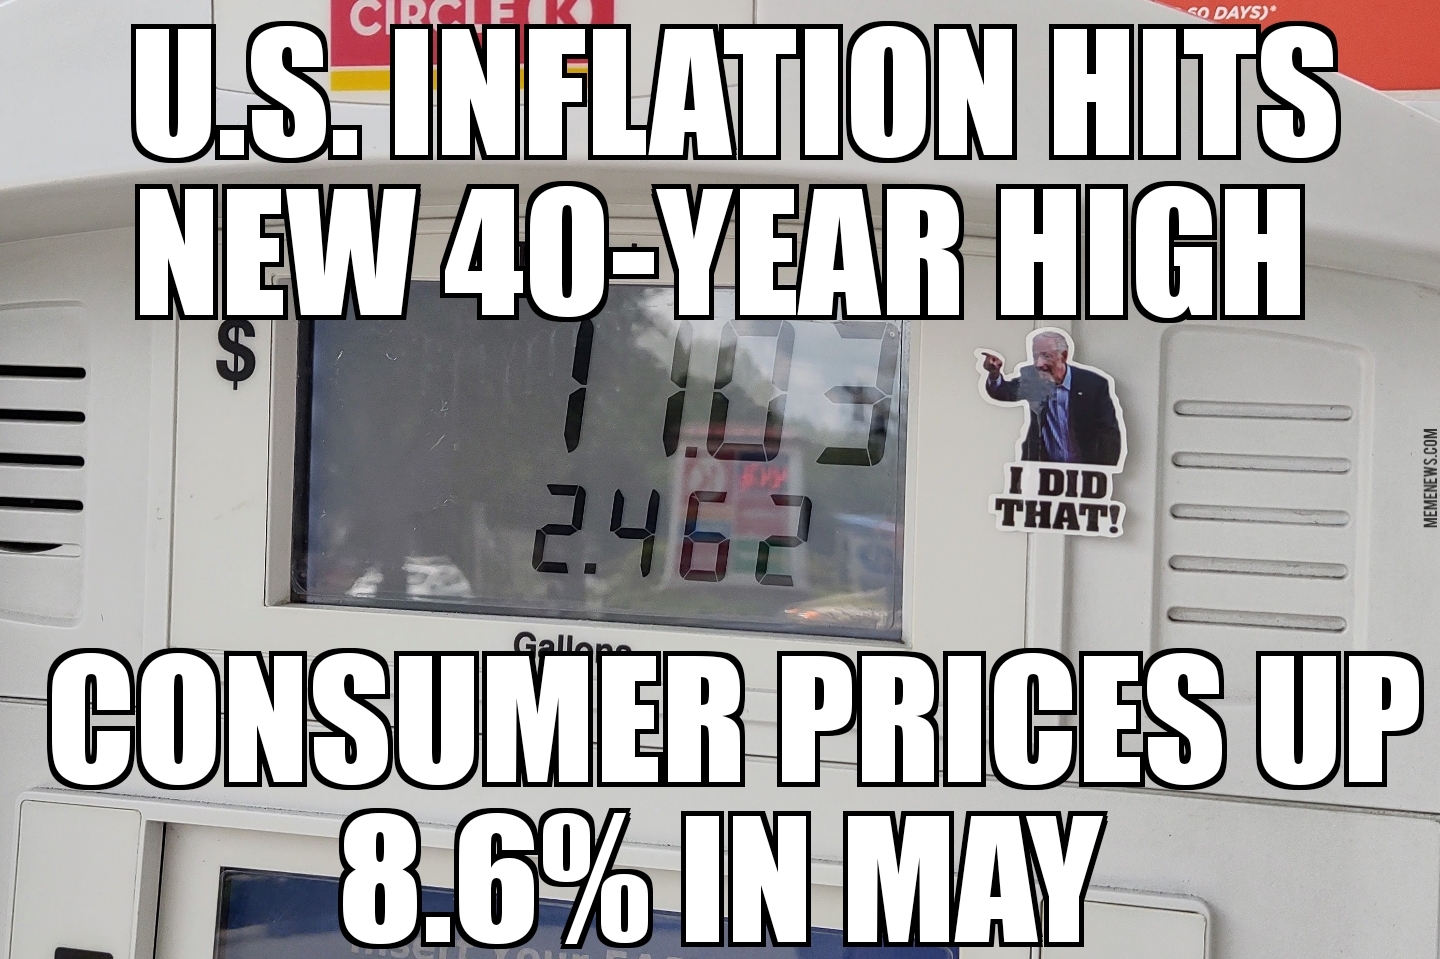 Inflation hits new high